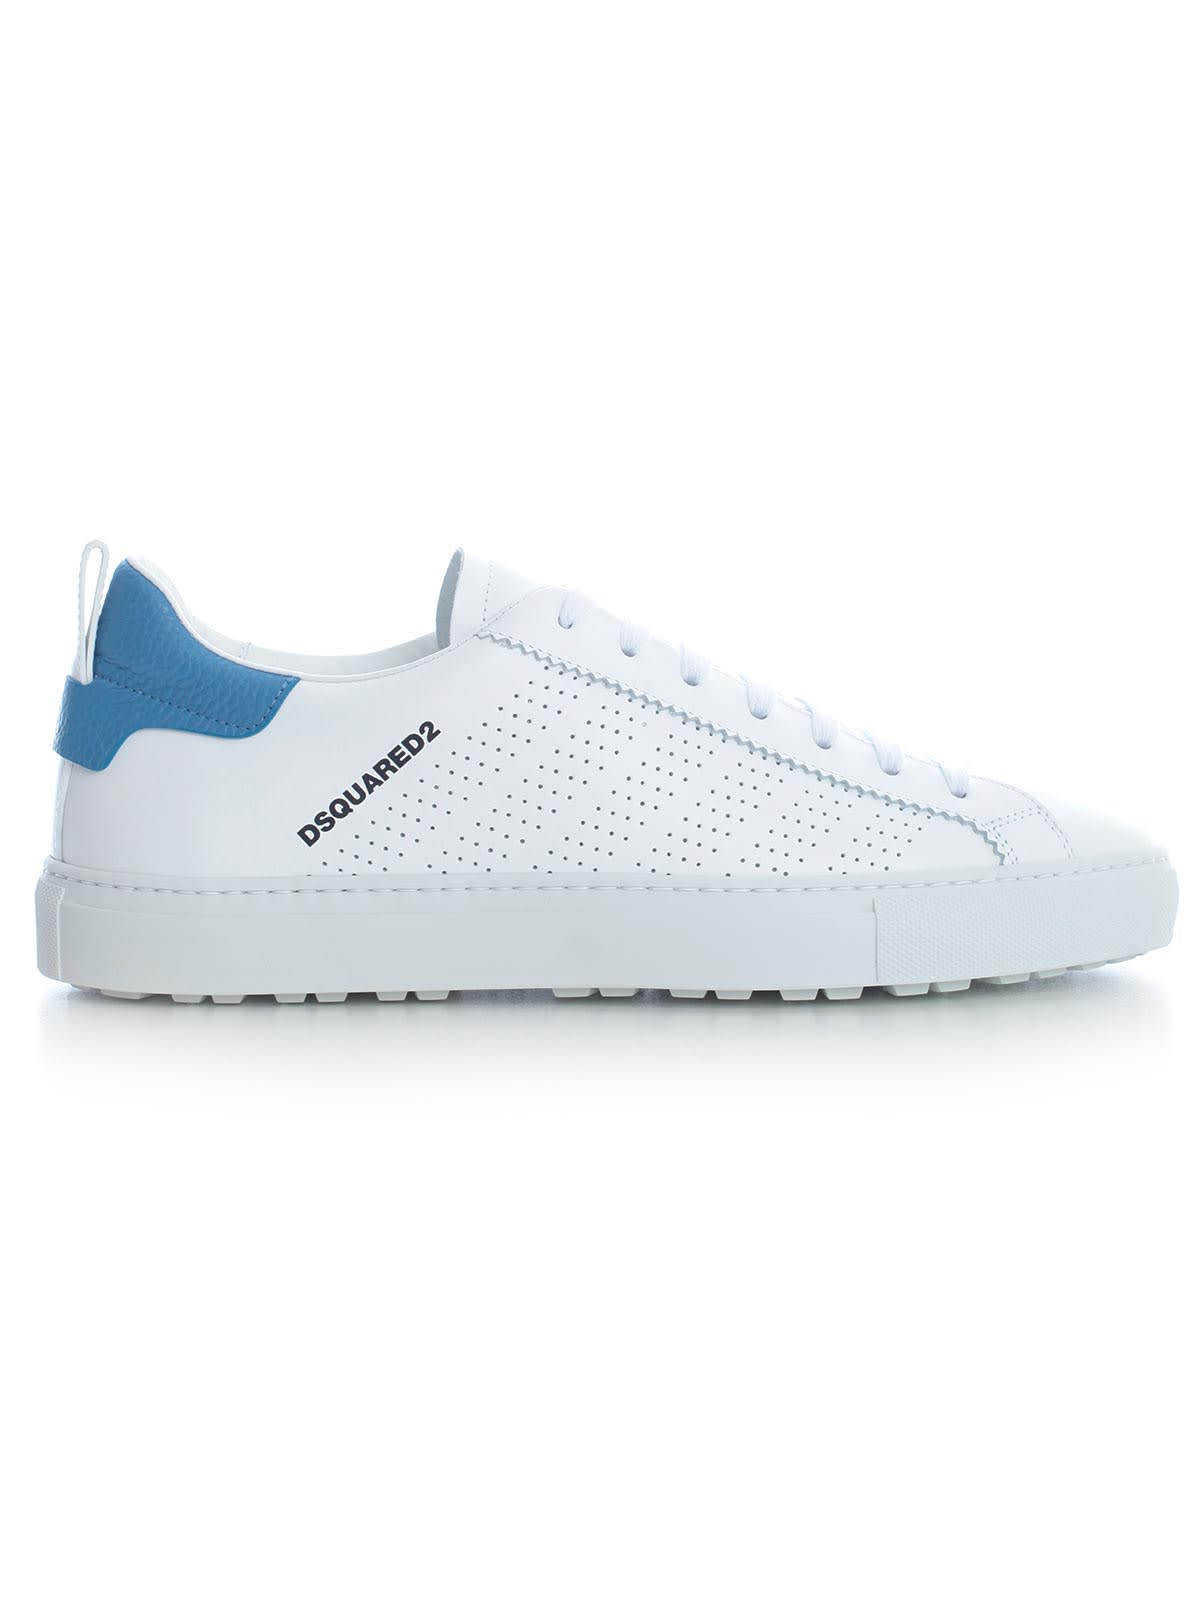 DSQUARED2 CLASSIC SNEAKERS W/BLUE BACK,11248953